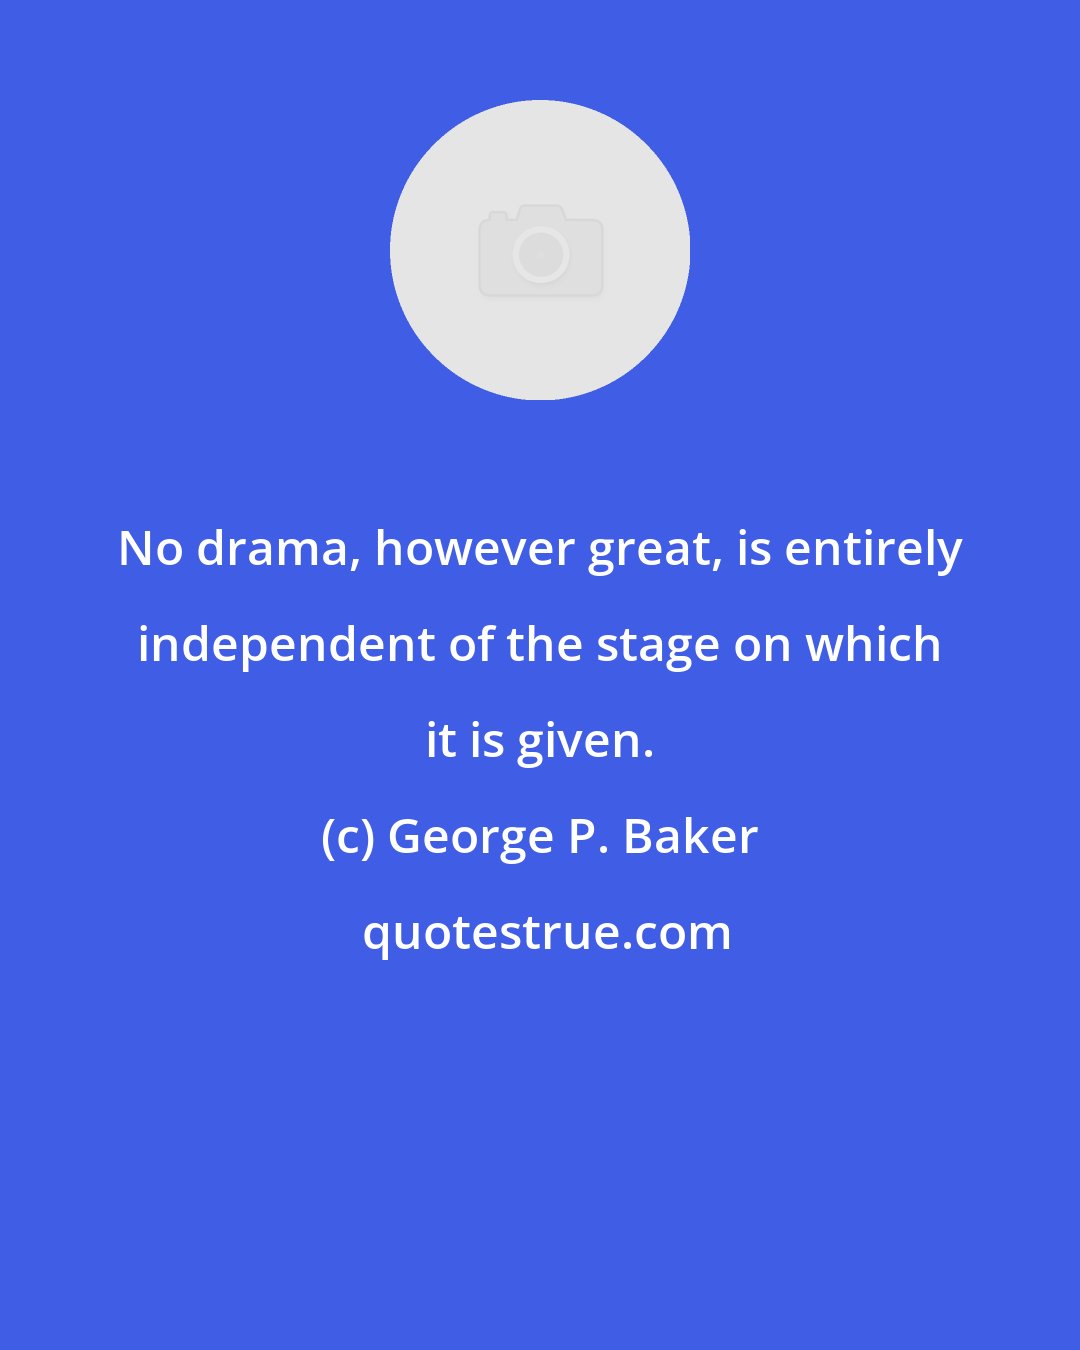 George P. Baker: No drama, however great, is entirely independent of the stage on which it is given.